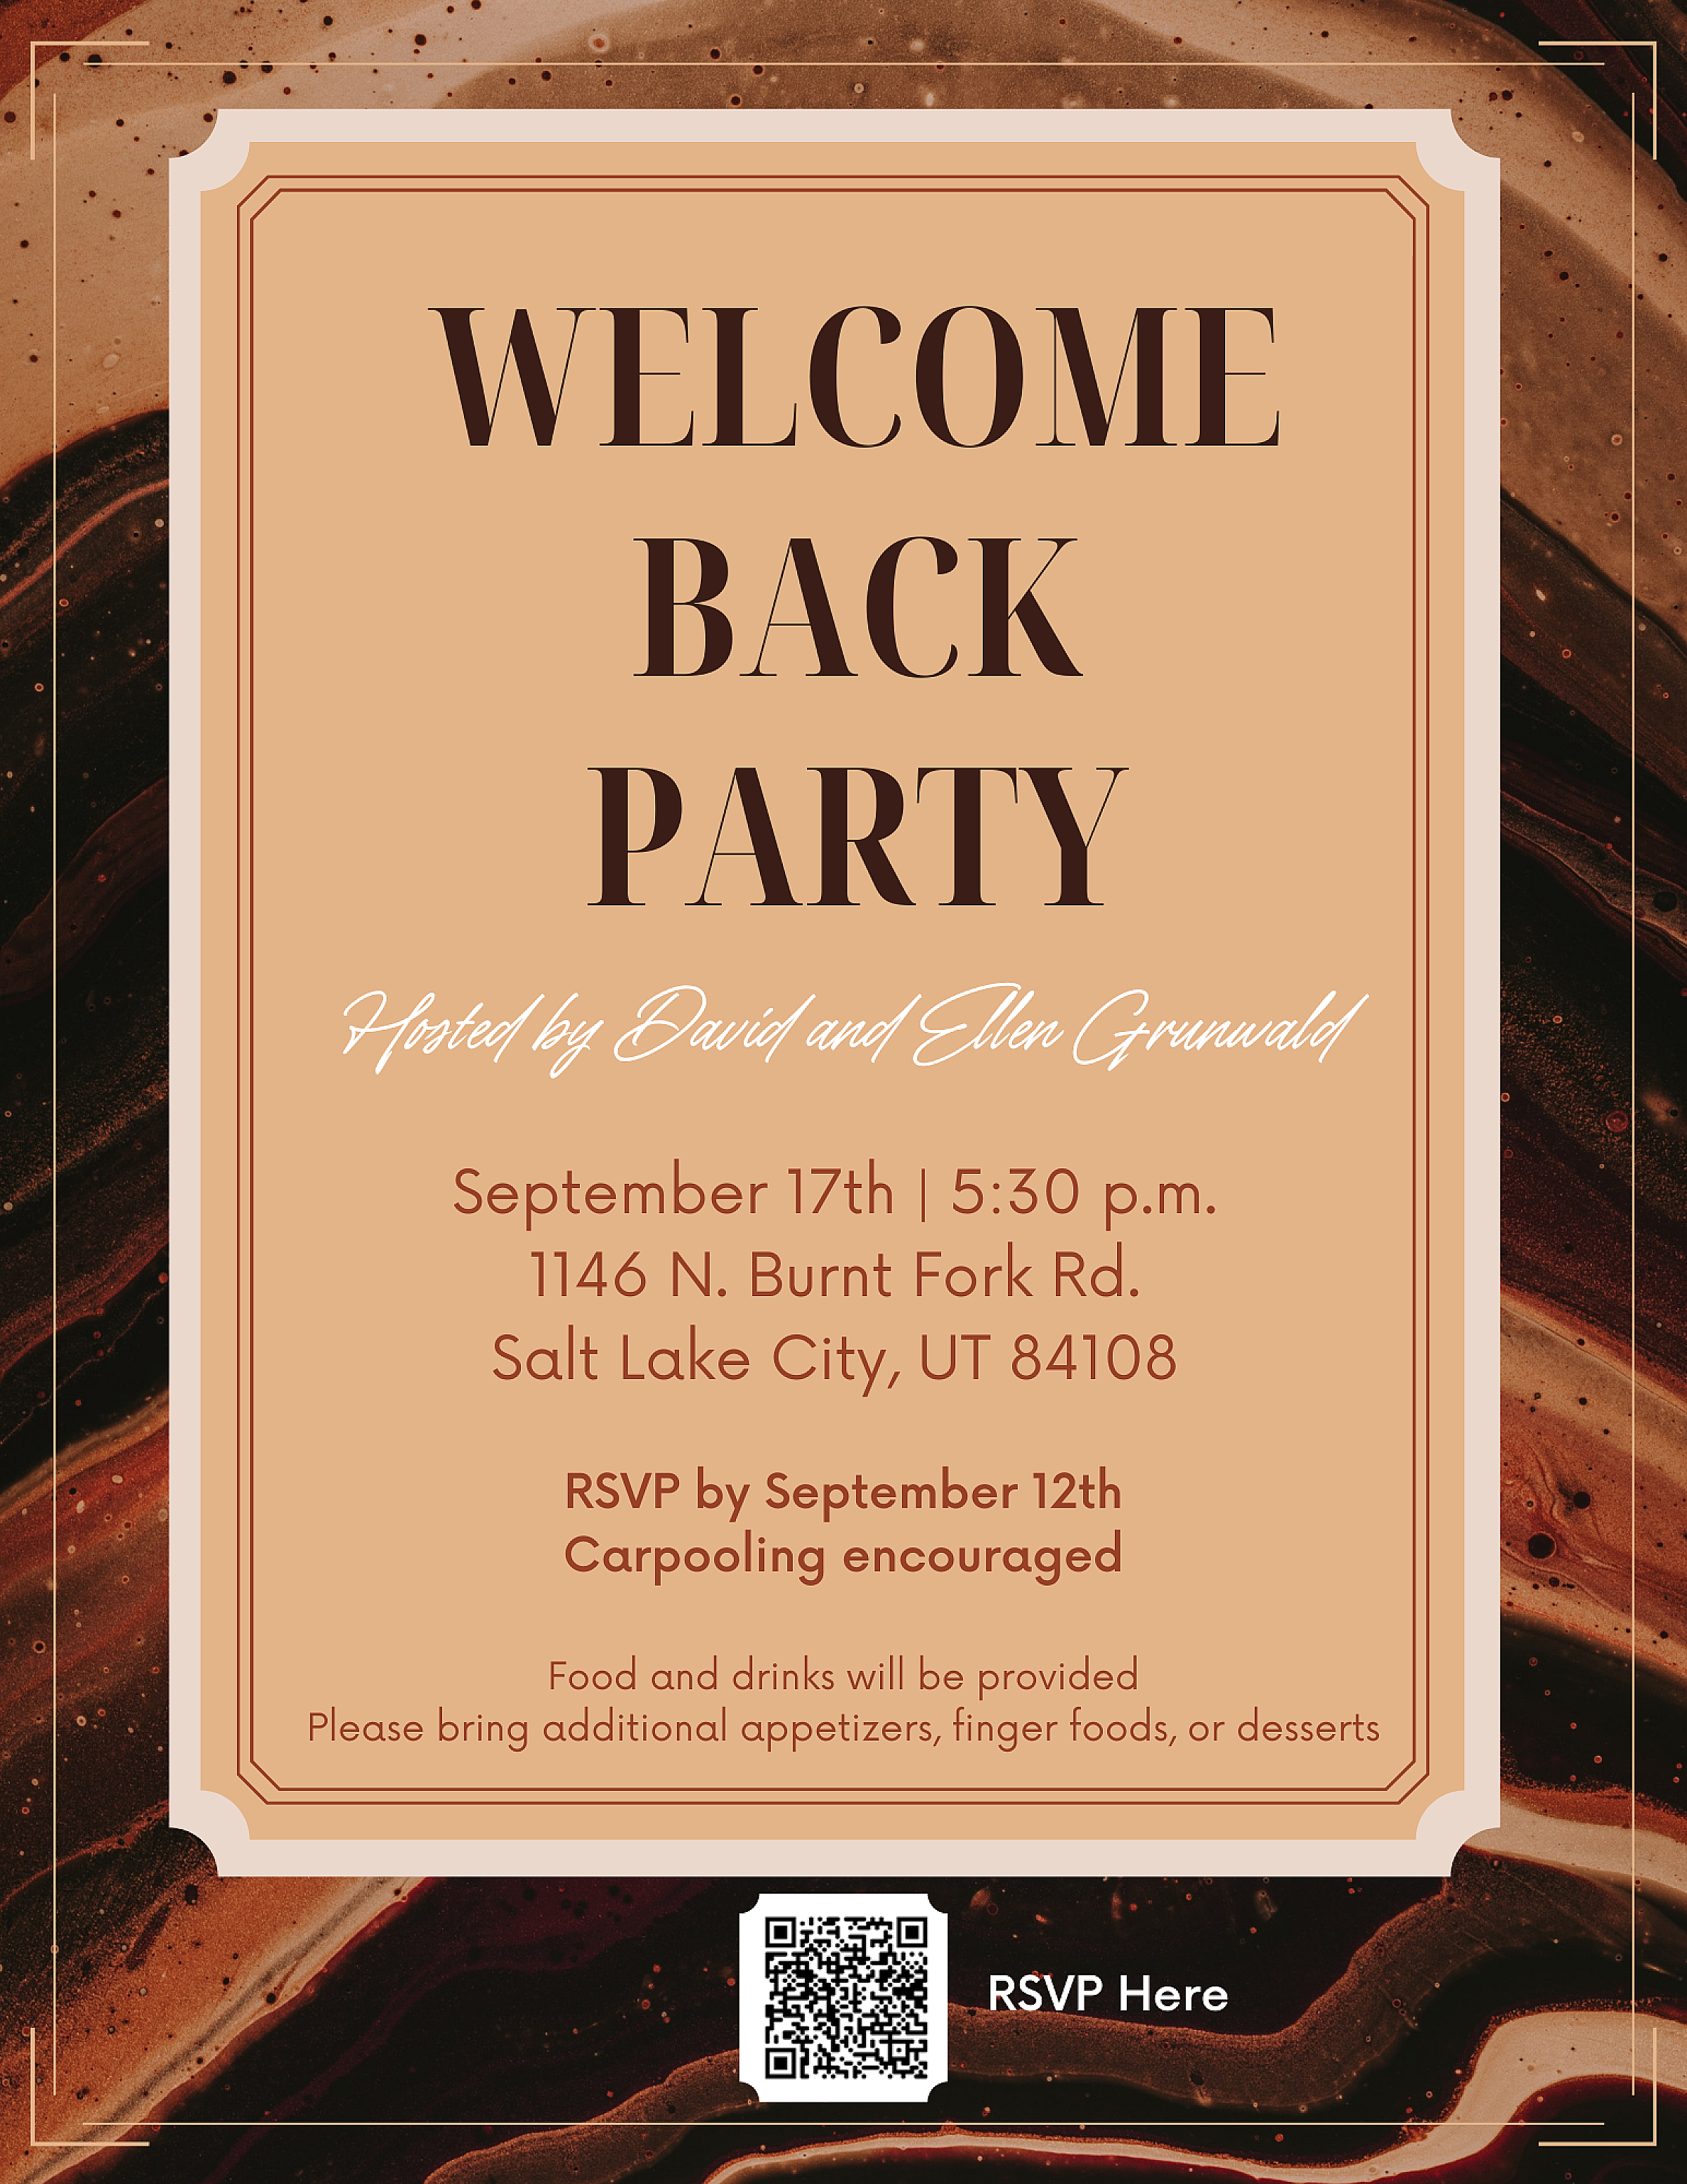 SACNAS 2022 welcome back party